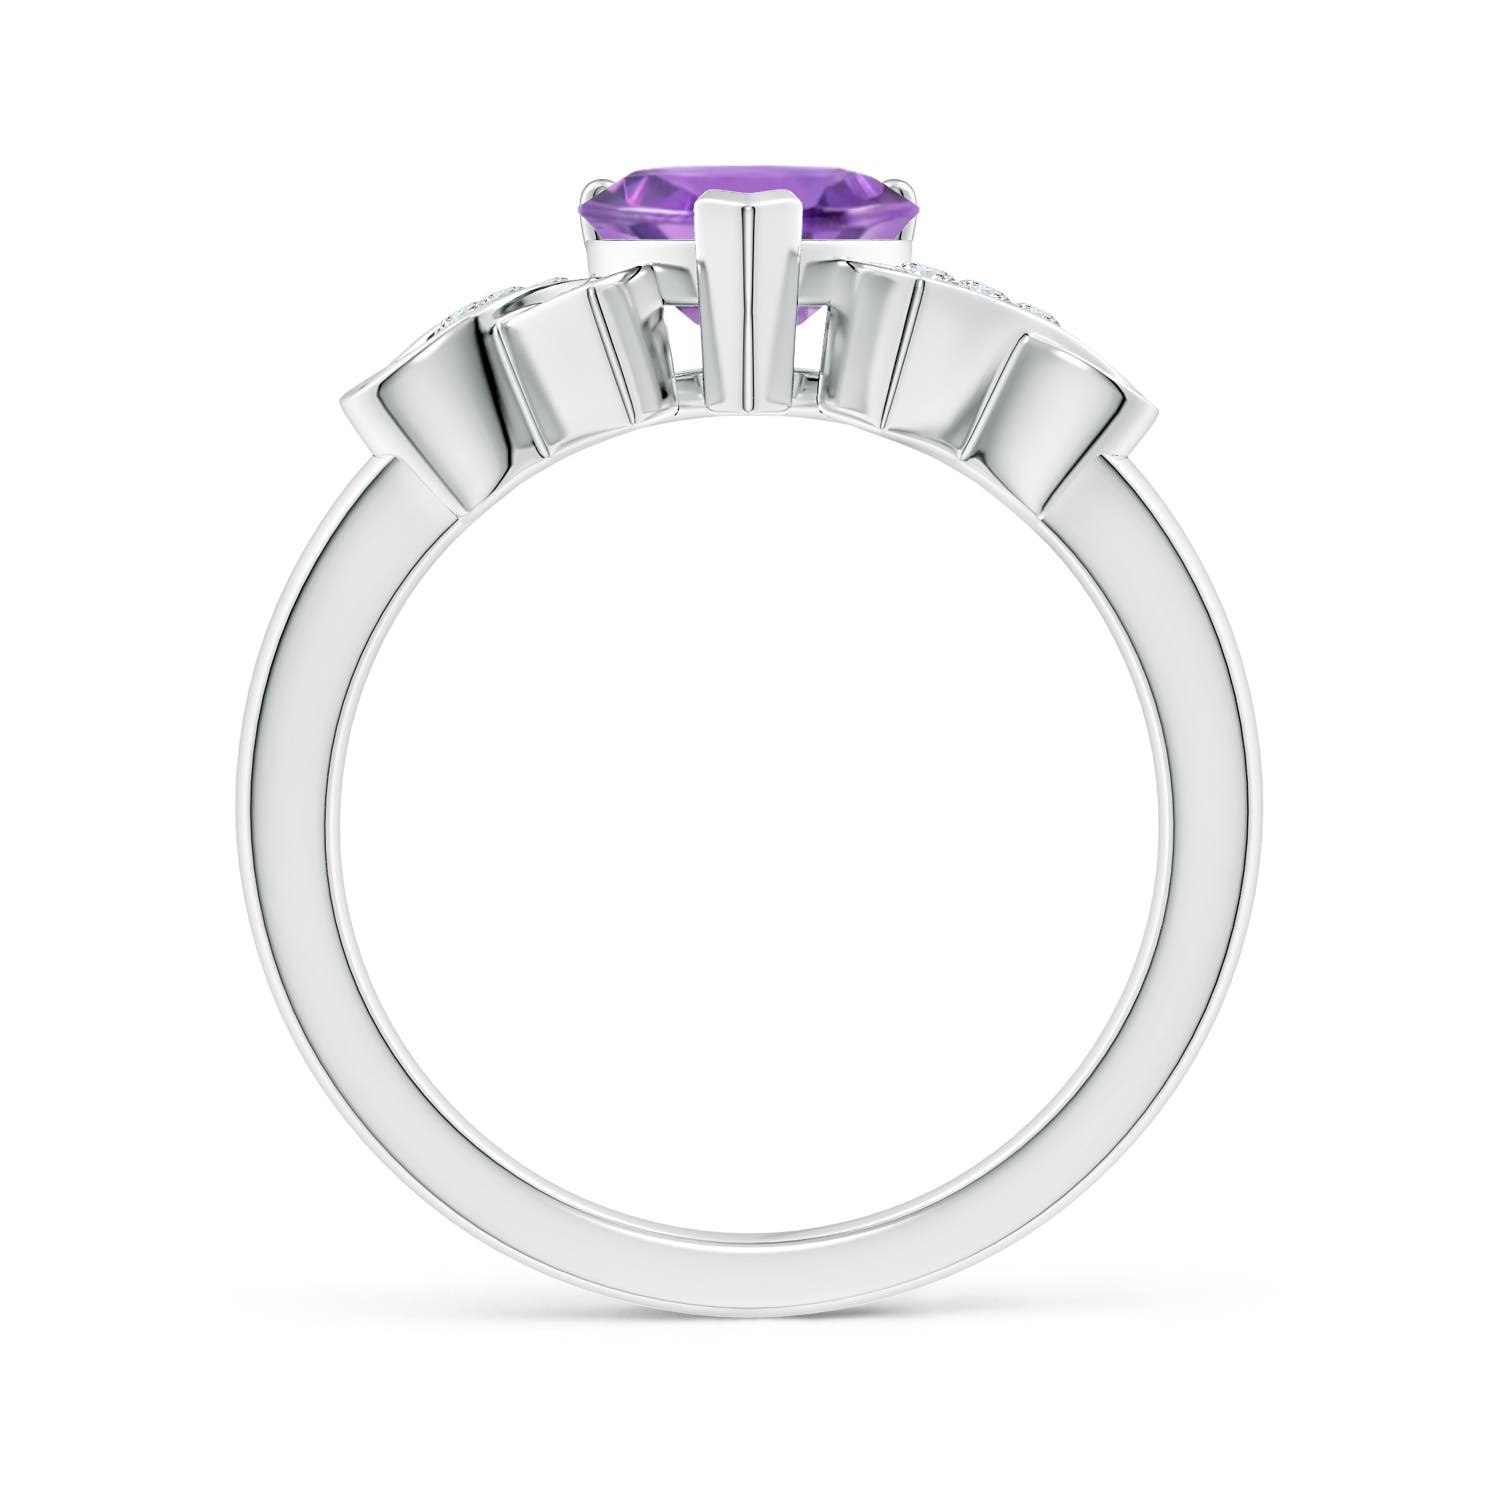 A - Amethyst / 1.17 CT / 14 KT White Gold